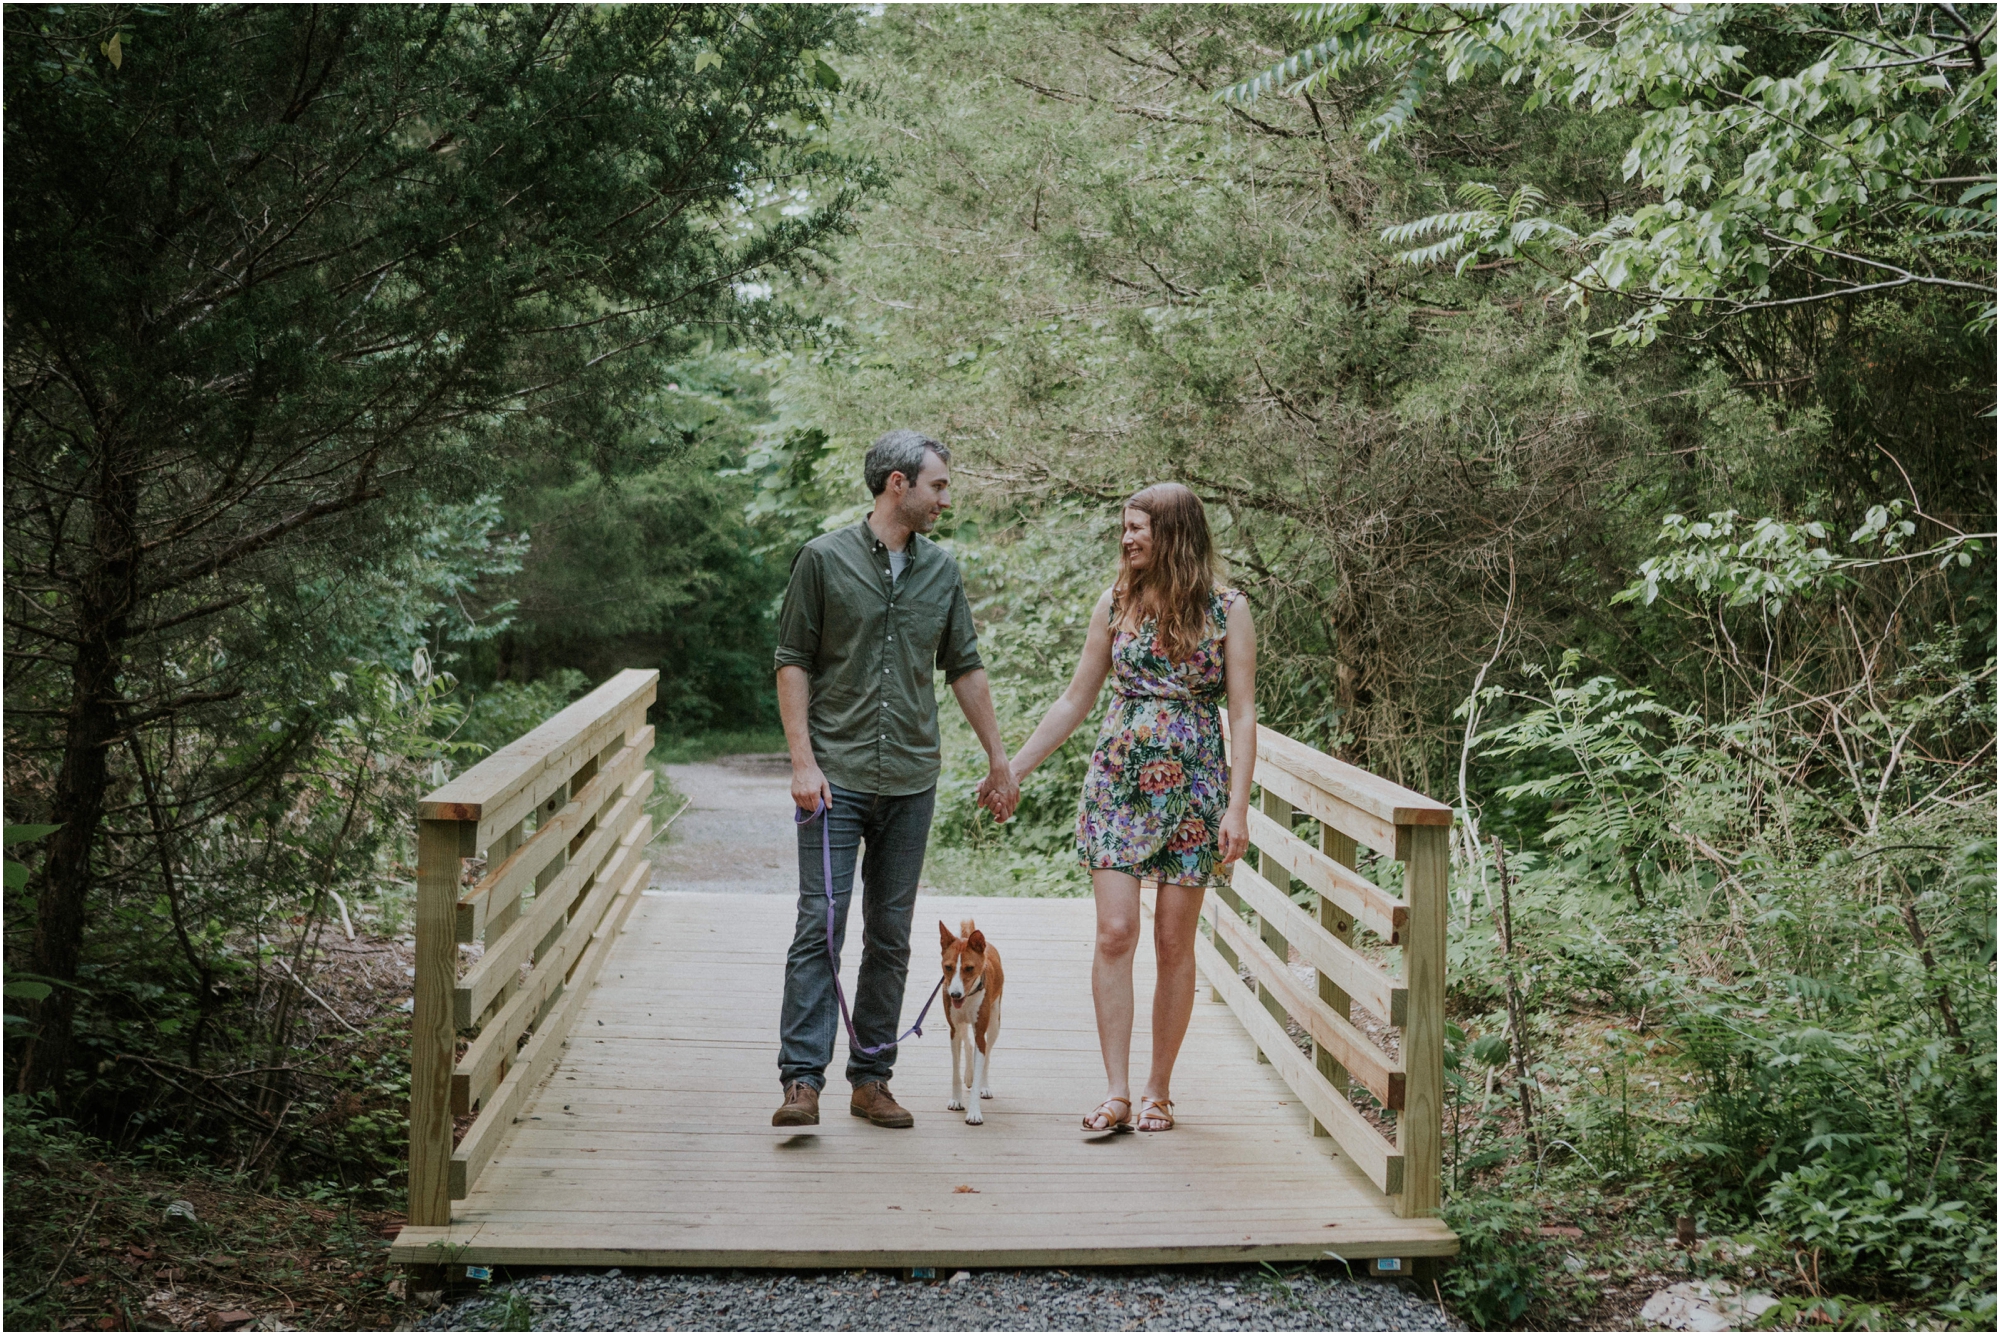 meads-quarry-ijams-nature-center-knoxville-tennessee-engagement-session-summer-northeast-tn-adventurous-outdoors-lake-katy-sergent_0026.jpg